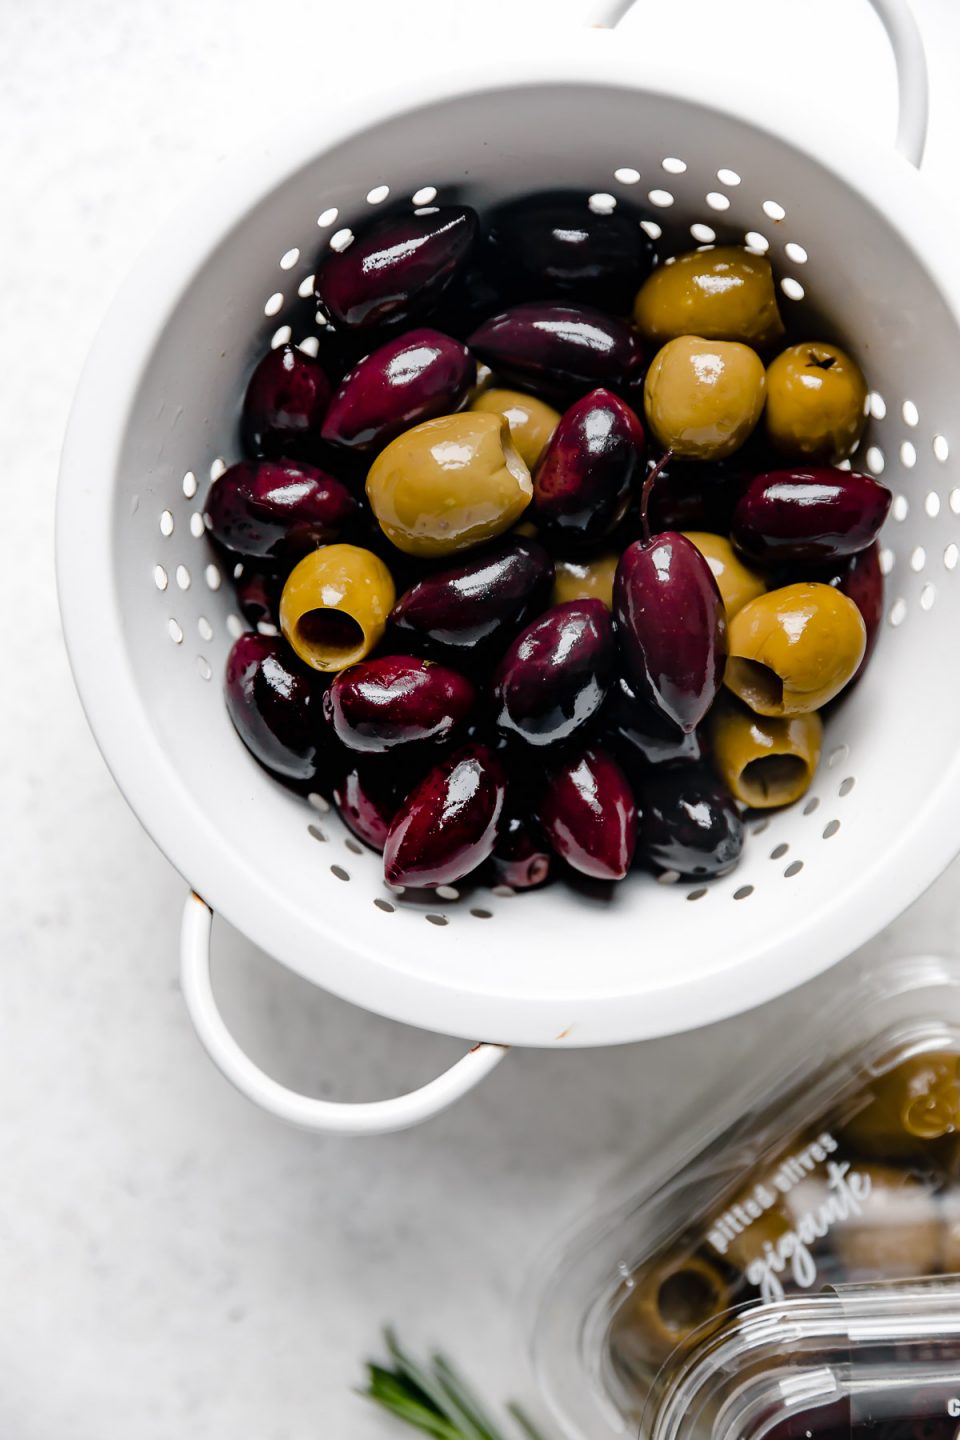 DeLallo calamata olives & gigante olives in a strainer, next to their packaging.